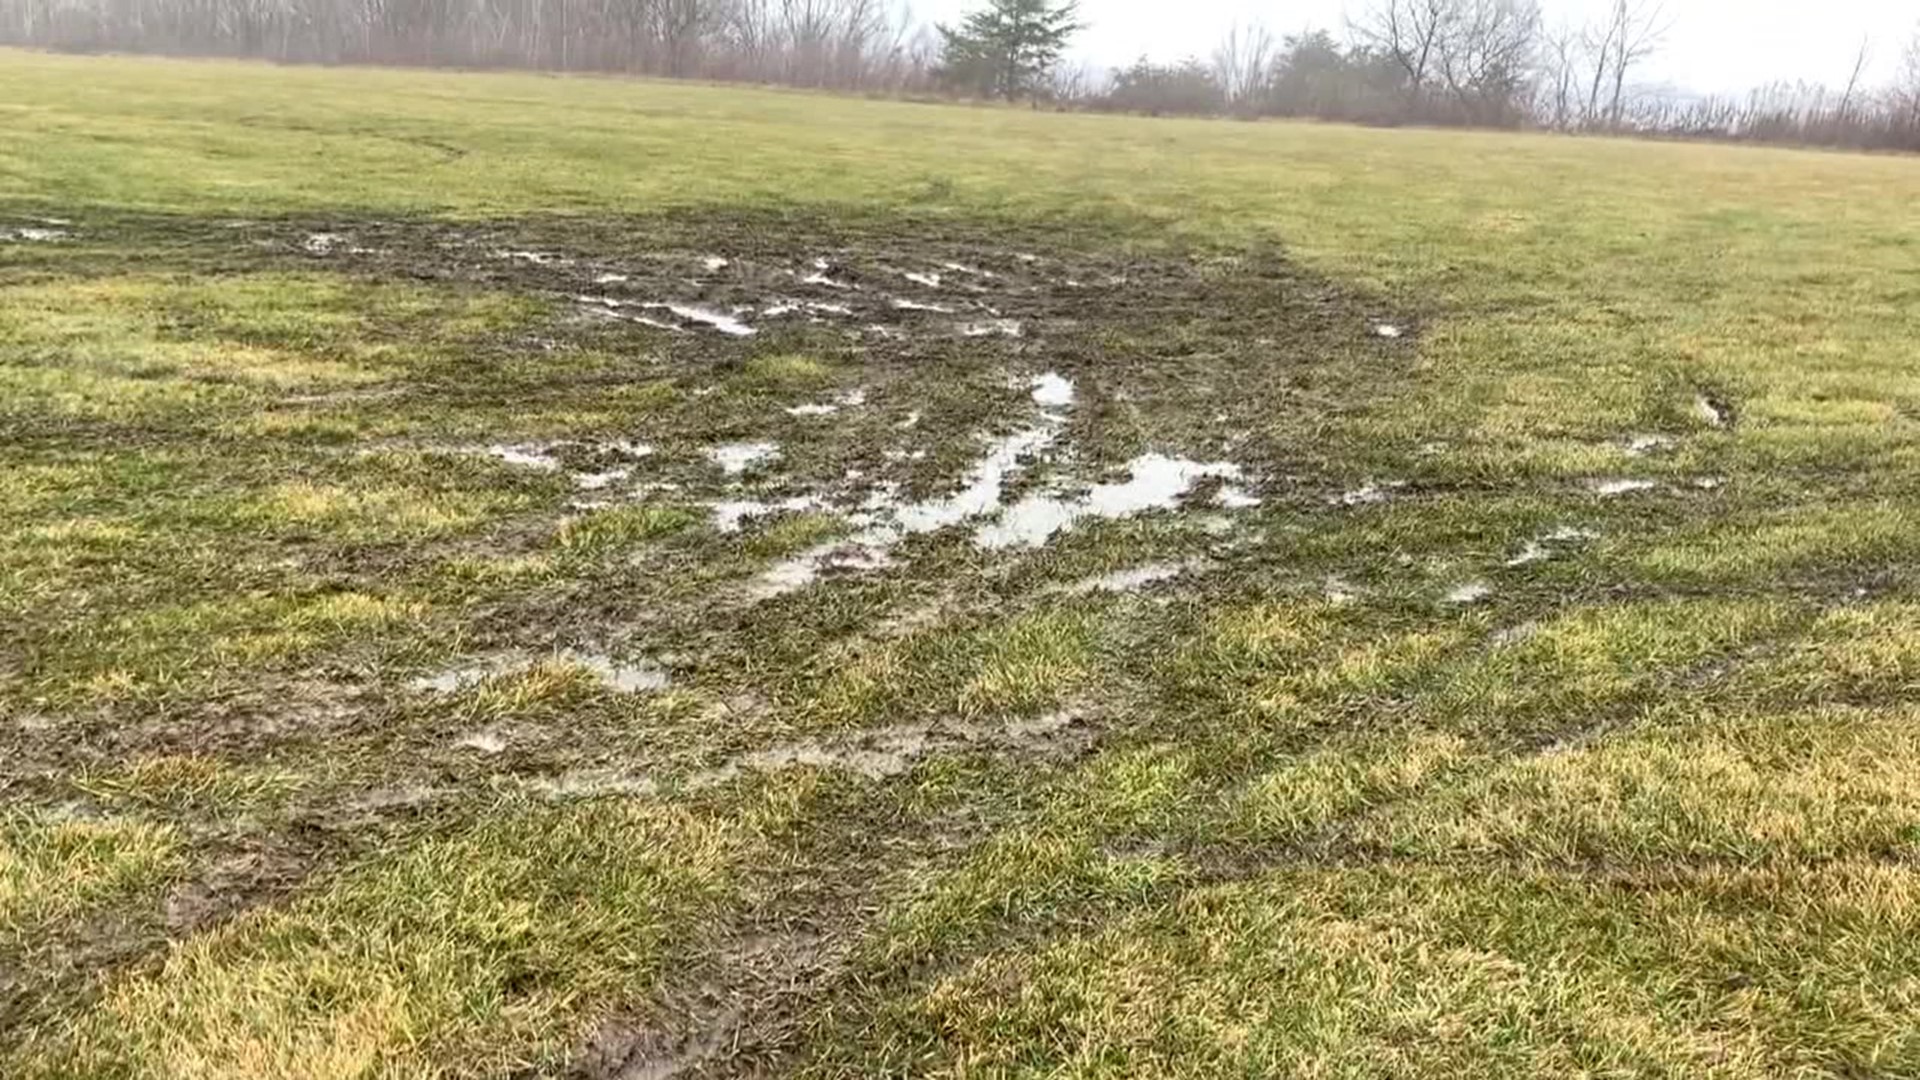 The fields used by a youth soccer club were damaged by trespassing ATVs.